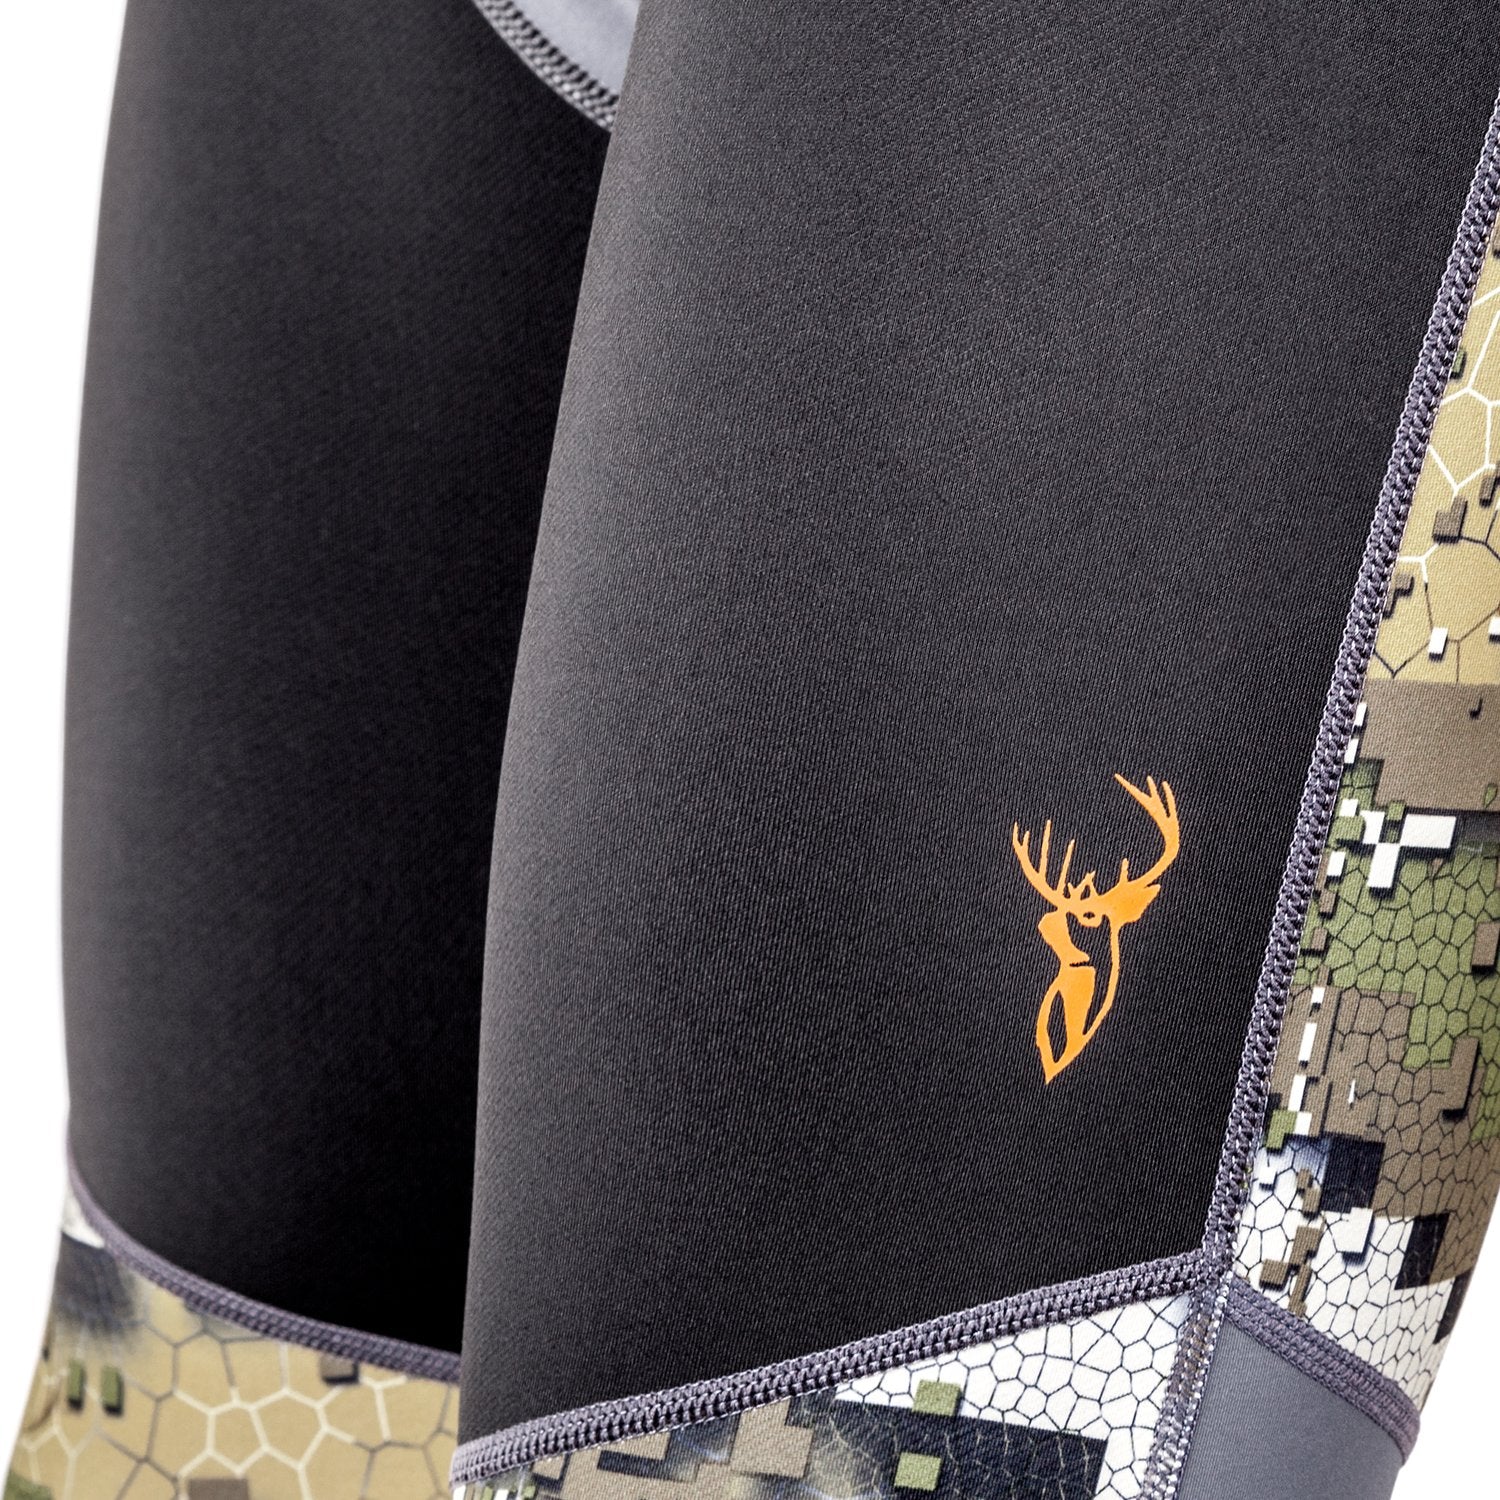 Hunters Element Core Leggings Desolve Veil -  - Mansfield Hunting & Fishing - Products to prepare for Corona Virus